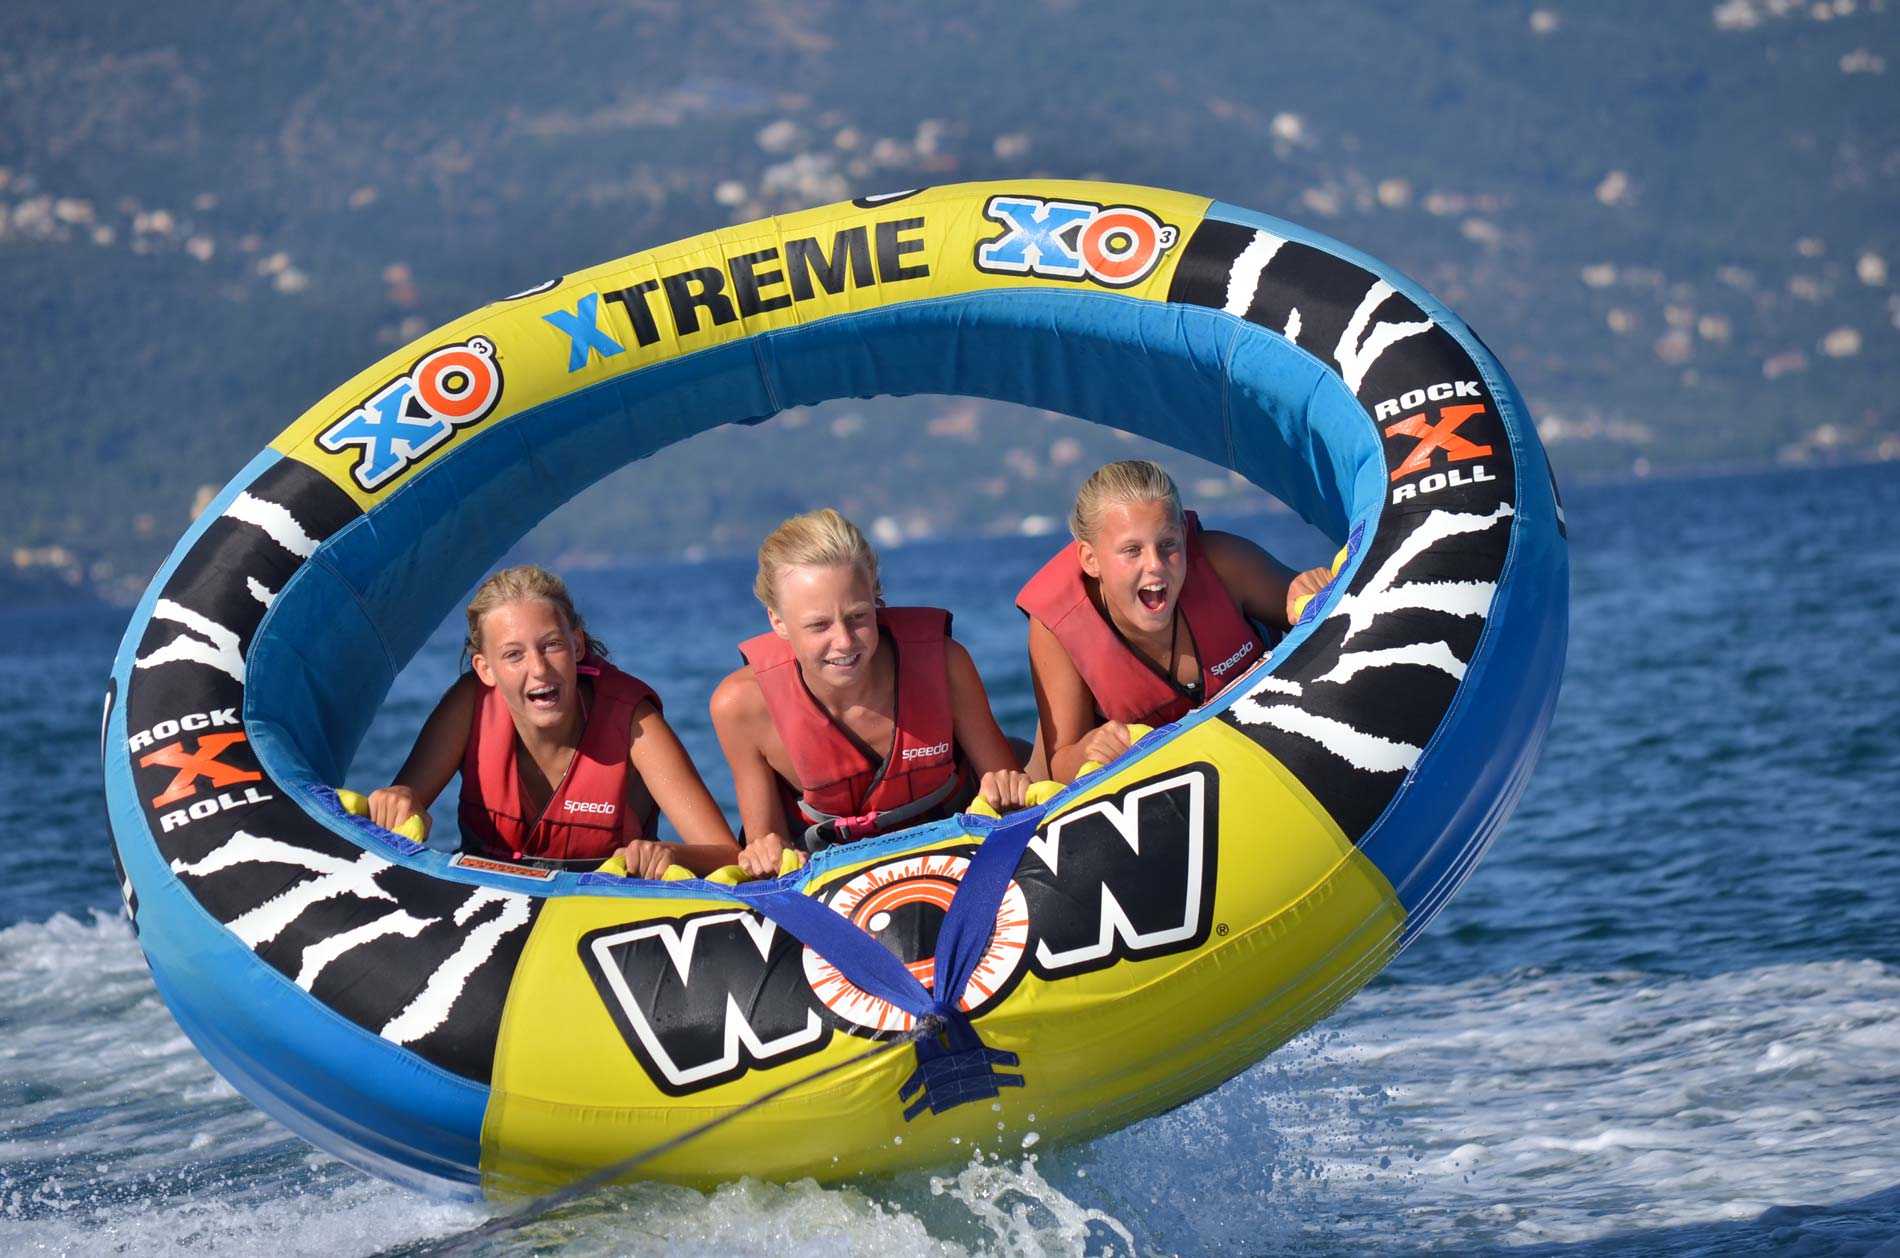 dassia-ski-club-watersports-corfu-inflatables-fun-dassia-sea-summer-beach-coast-adrenaline-yacht-towing-waves-sports-friends-family-summer-in-corfu-holidays-vacation-freetime-funtime-activities-ringos